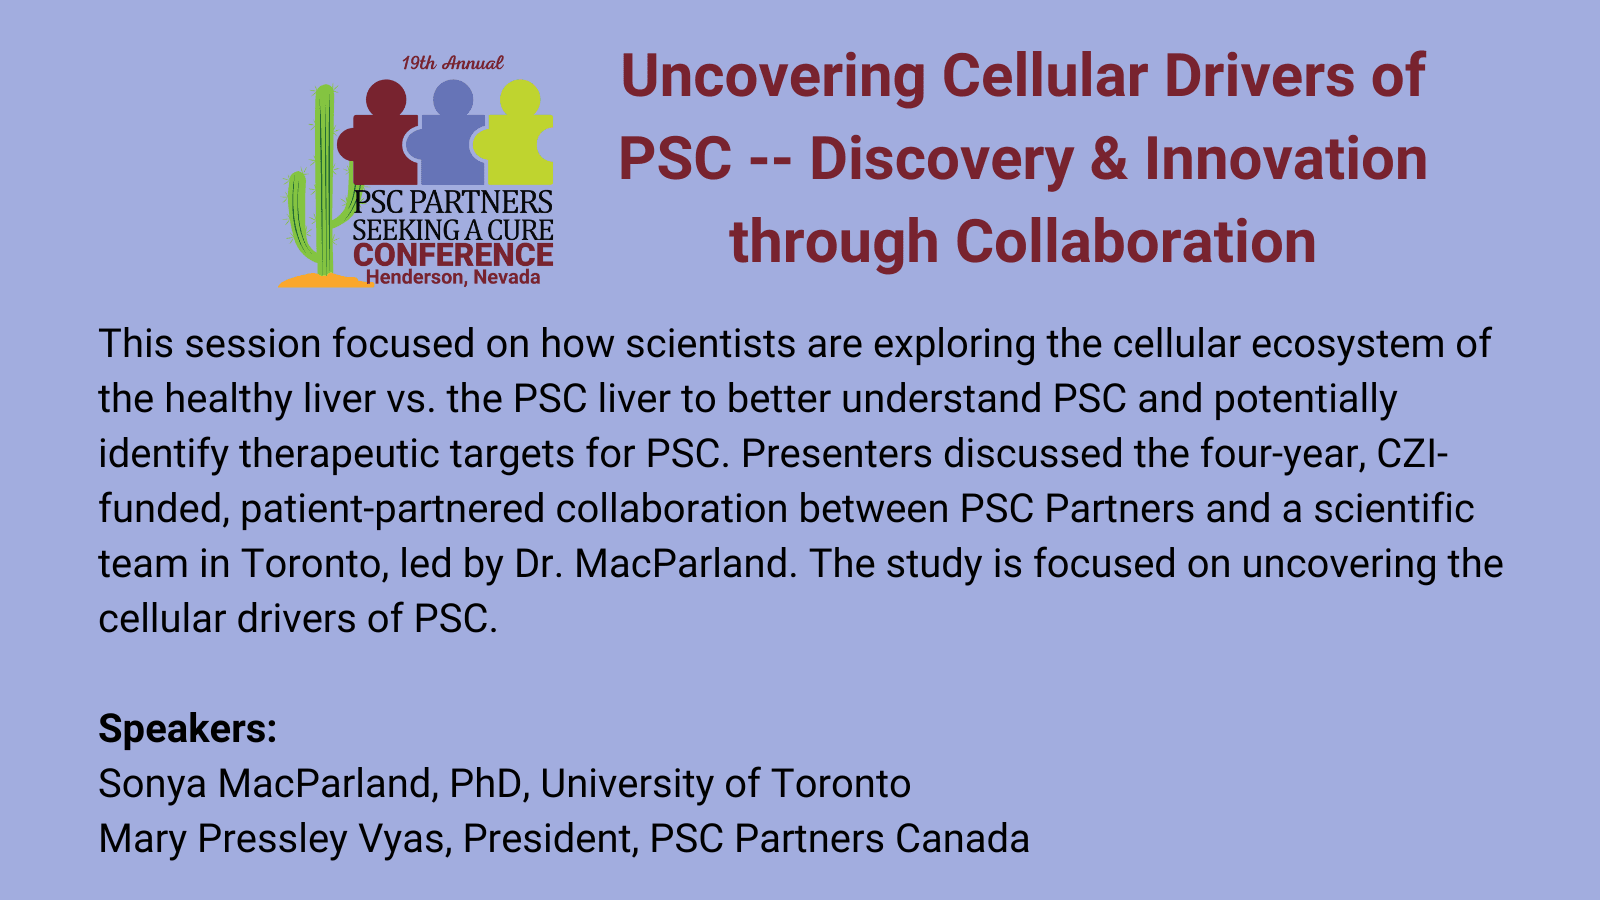 Uncovering Cellular Drivers of PSC: Discovery & Innovation through Collaboration